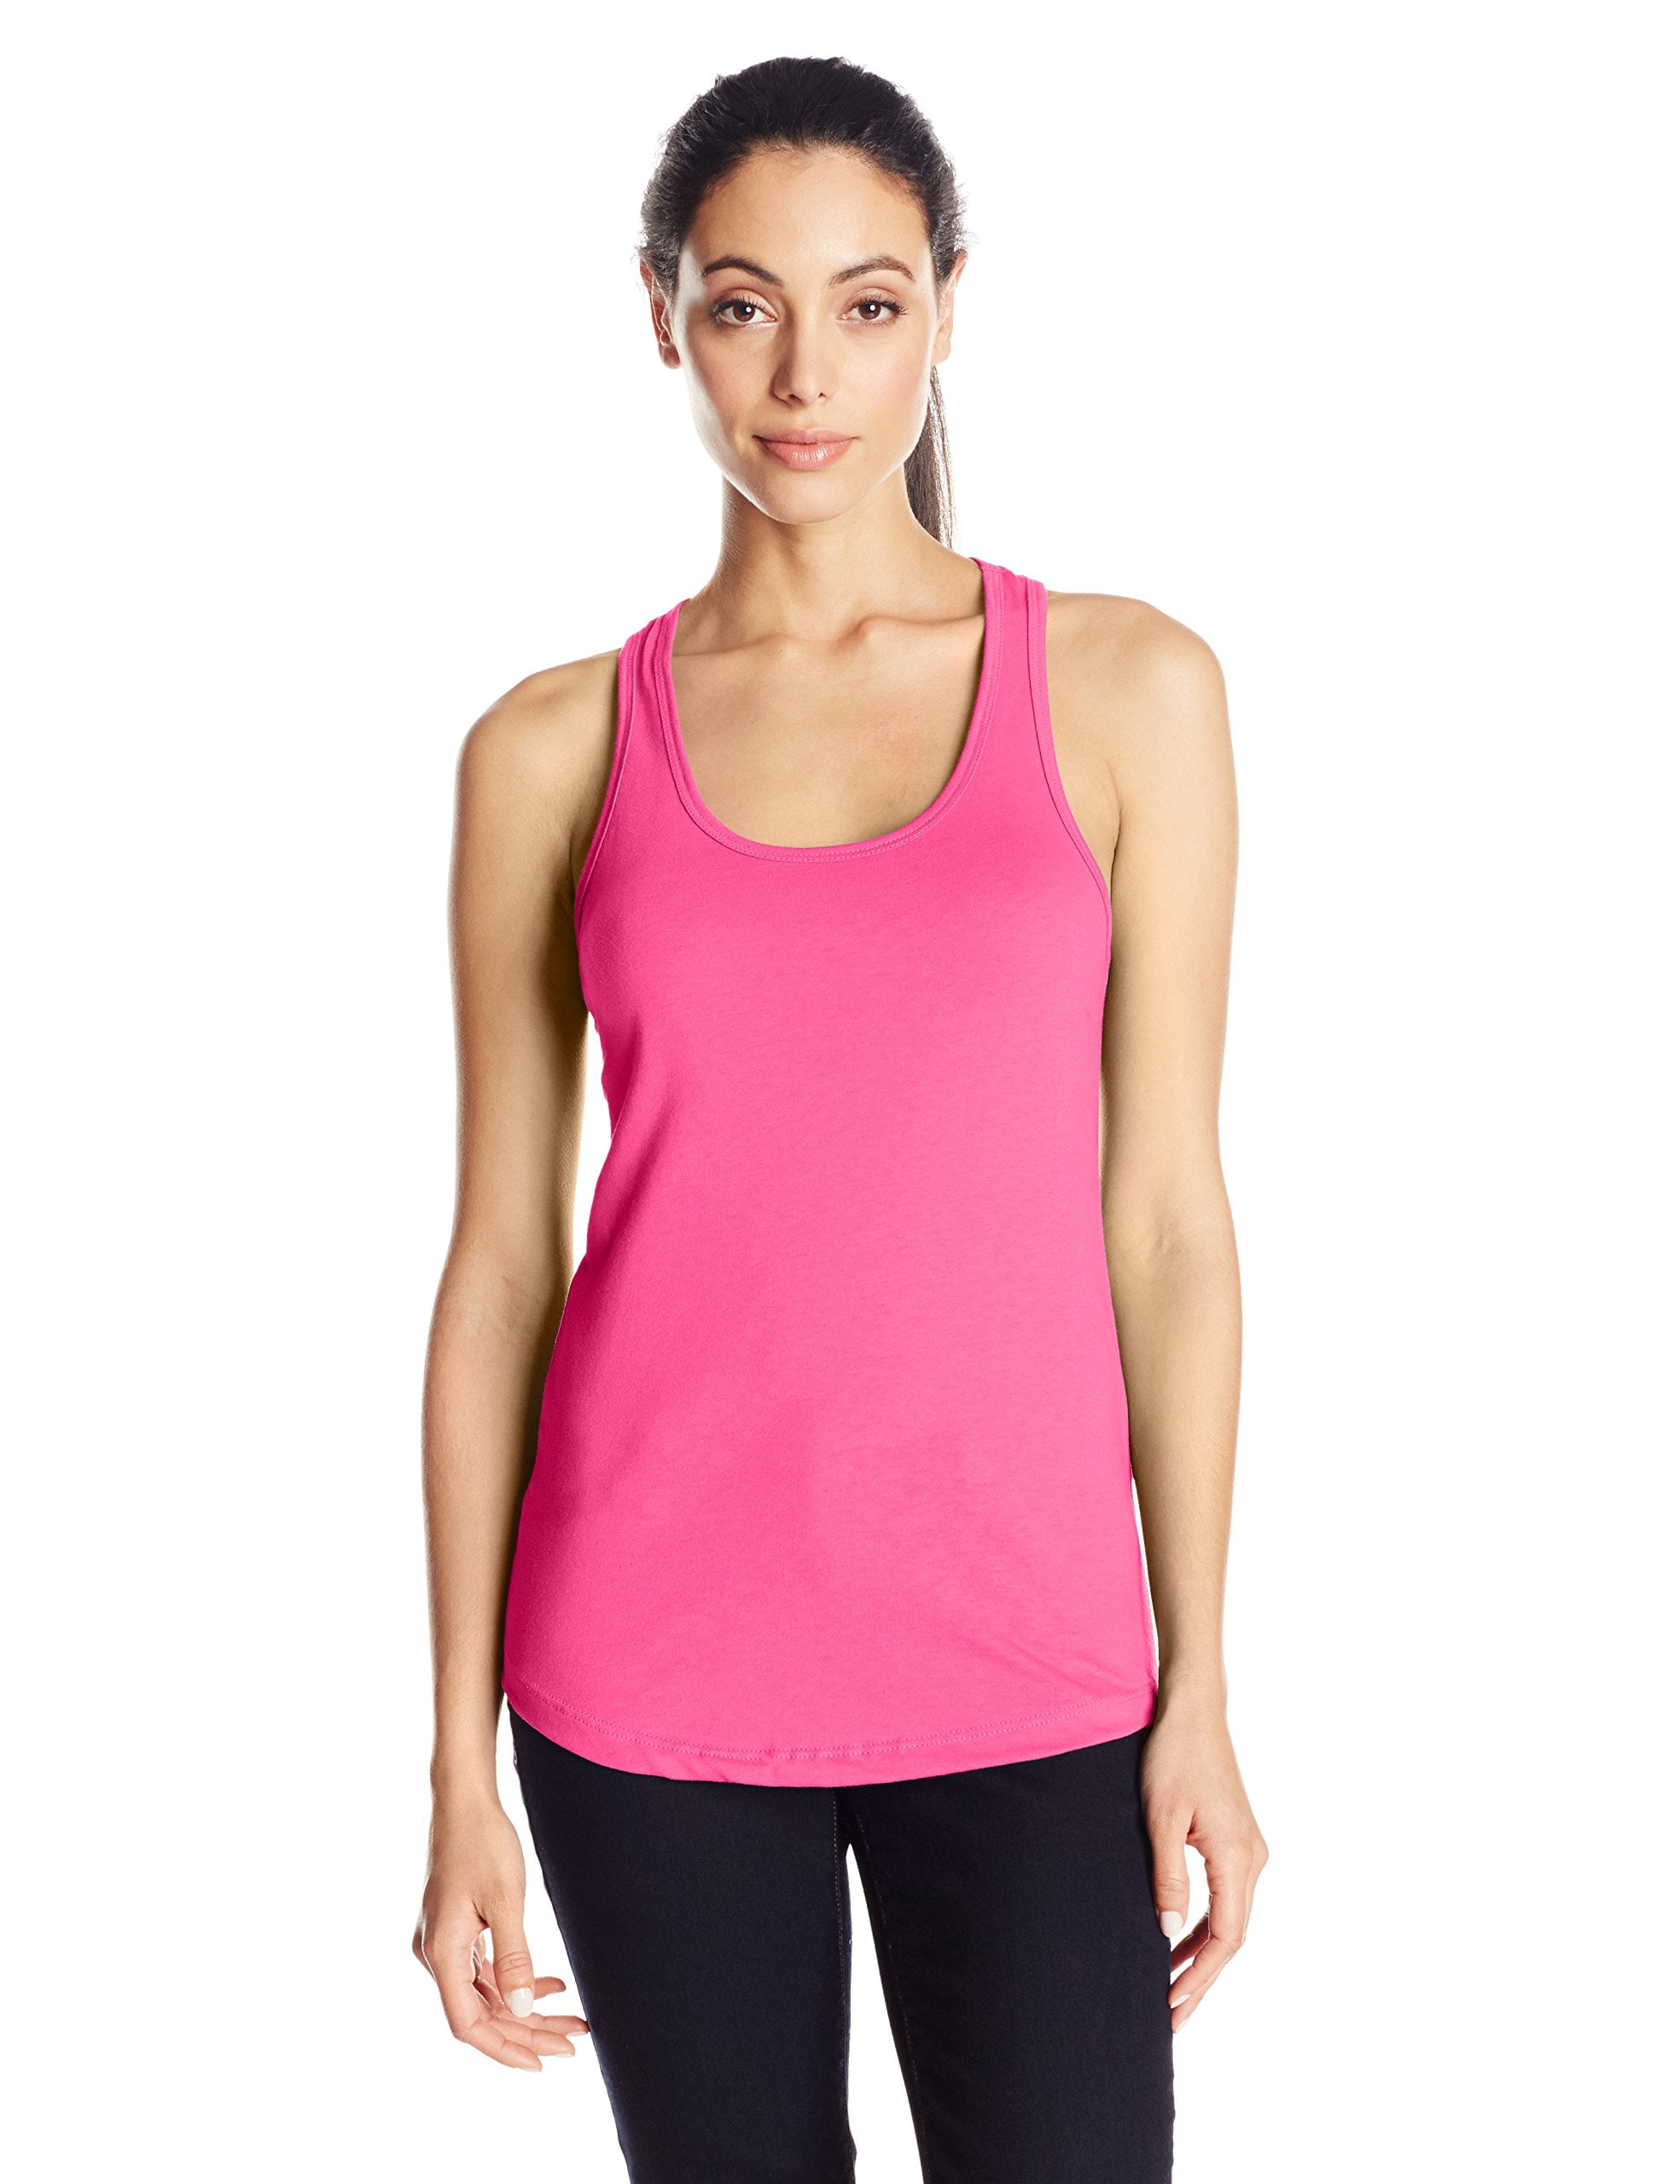 Clementine Apparel - Women's Clementine Ideal Racerback Tank Top ...